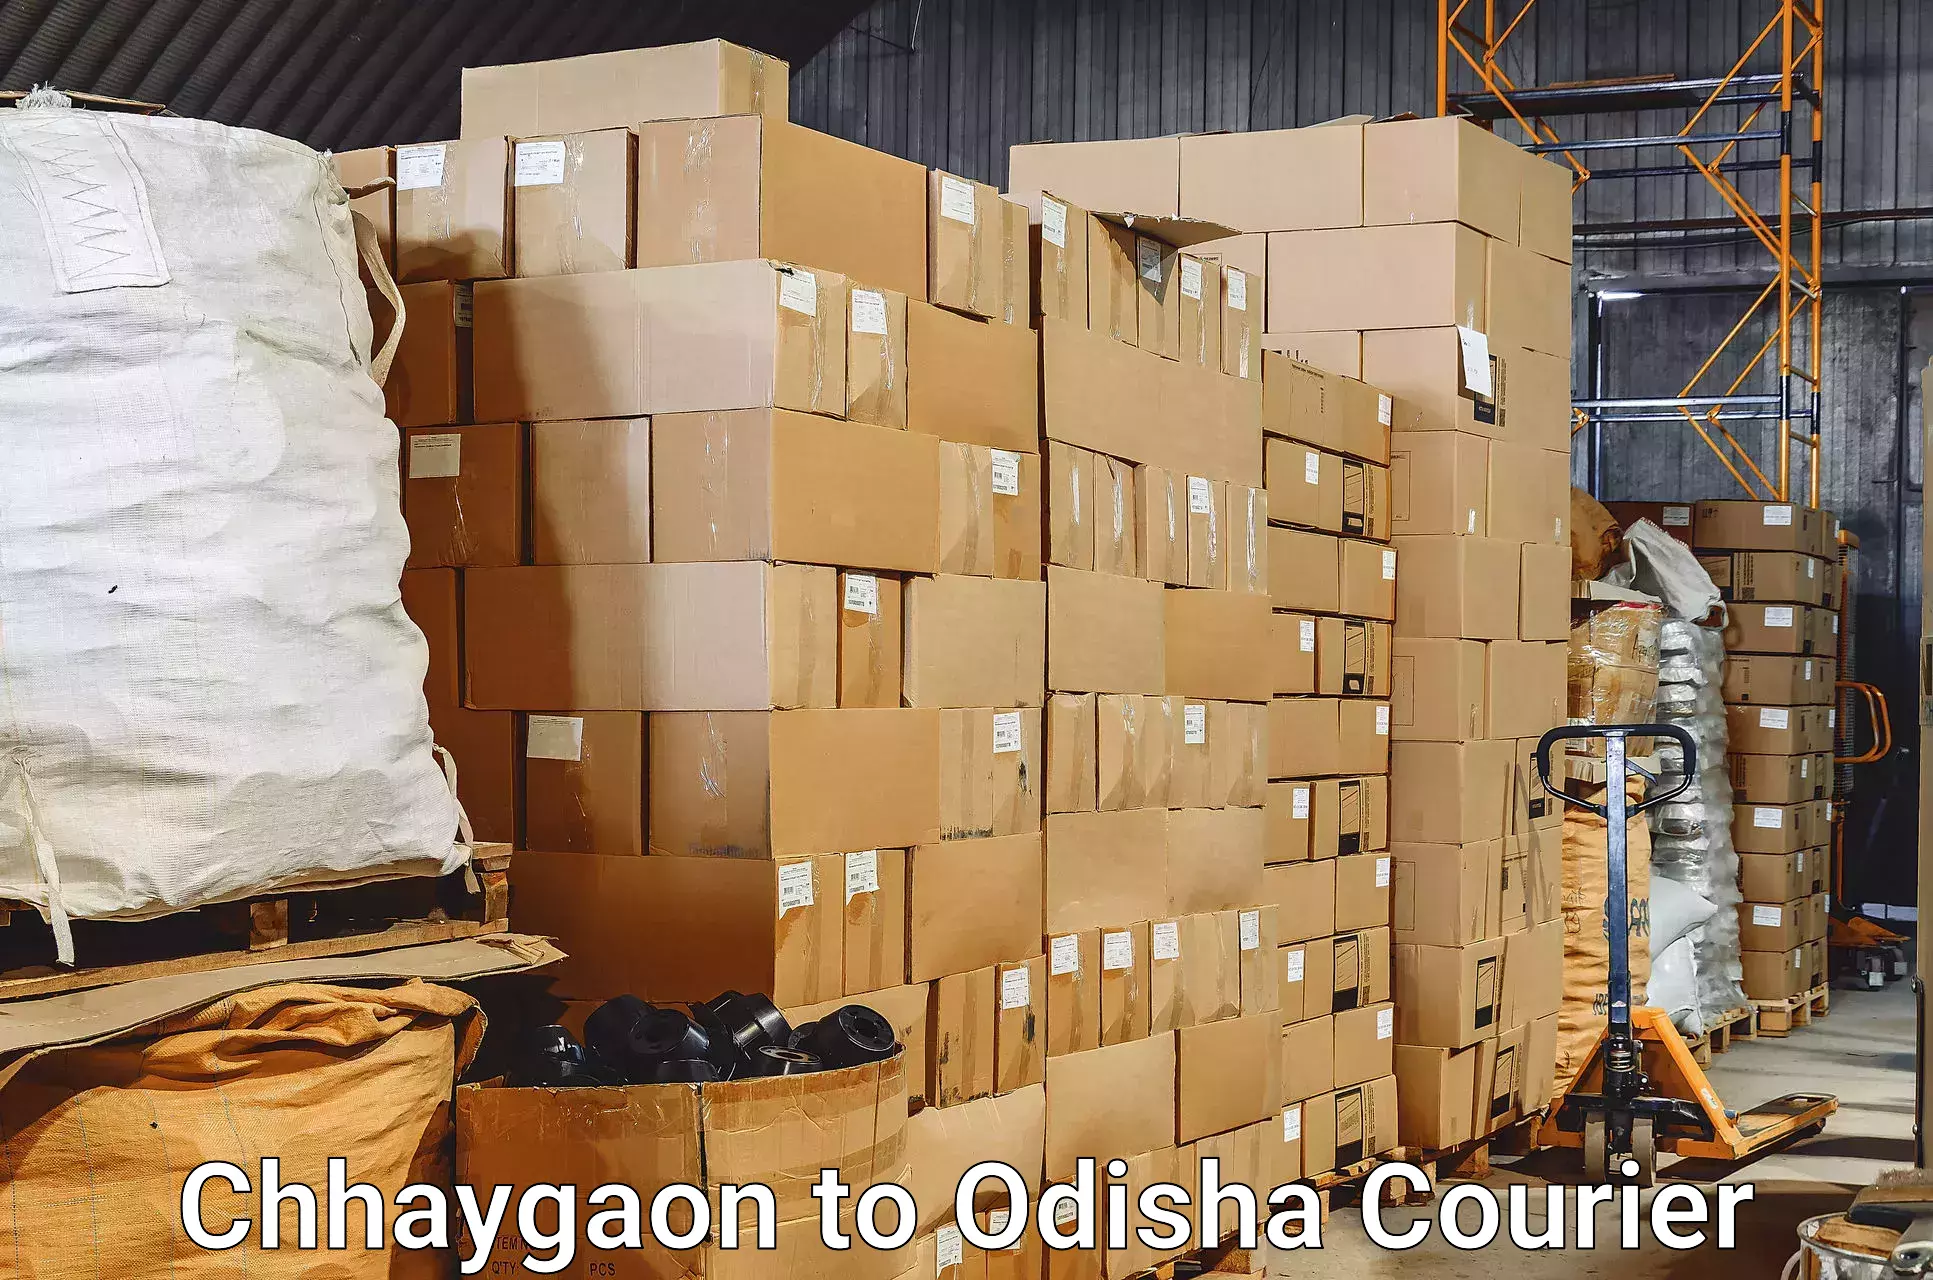 Doorstep luggage collection Chhaygaon to Umerkote